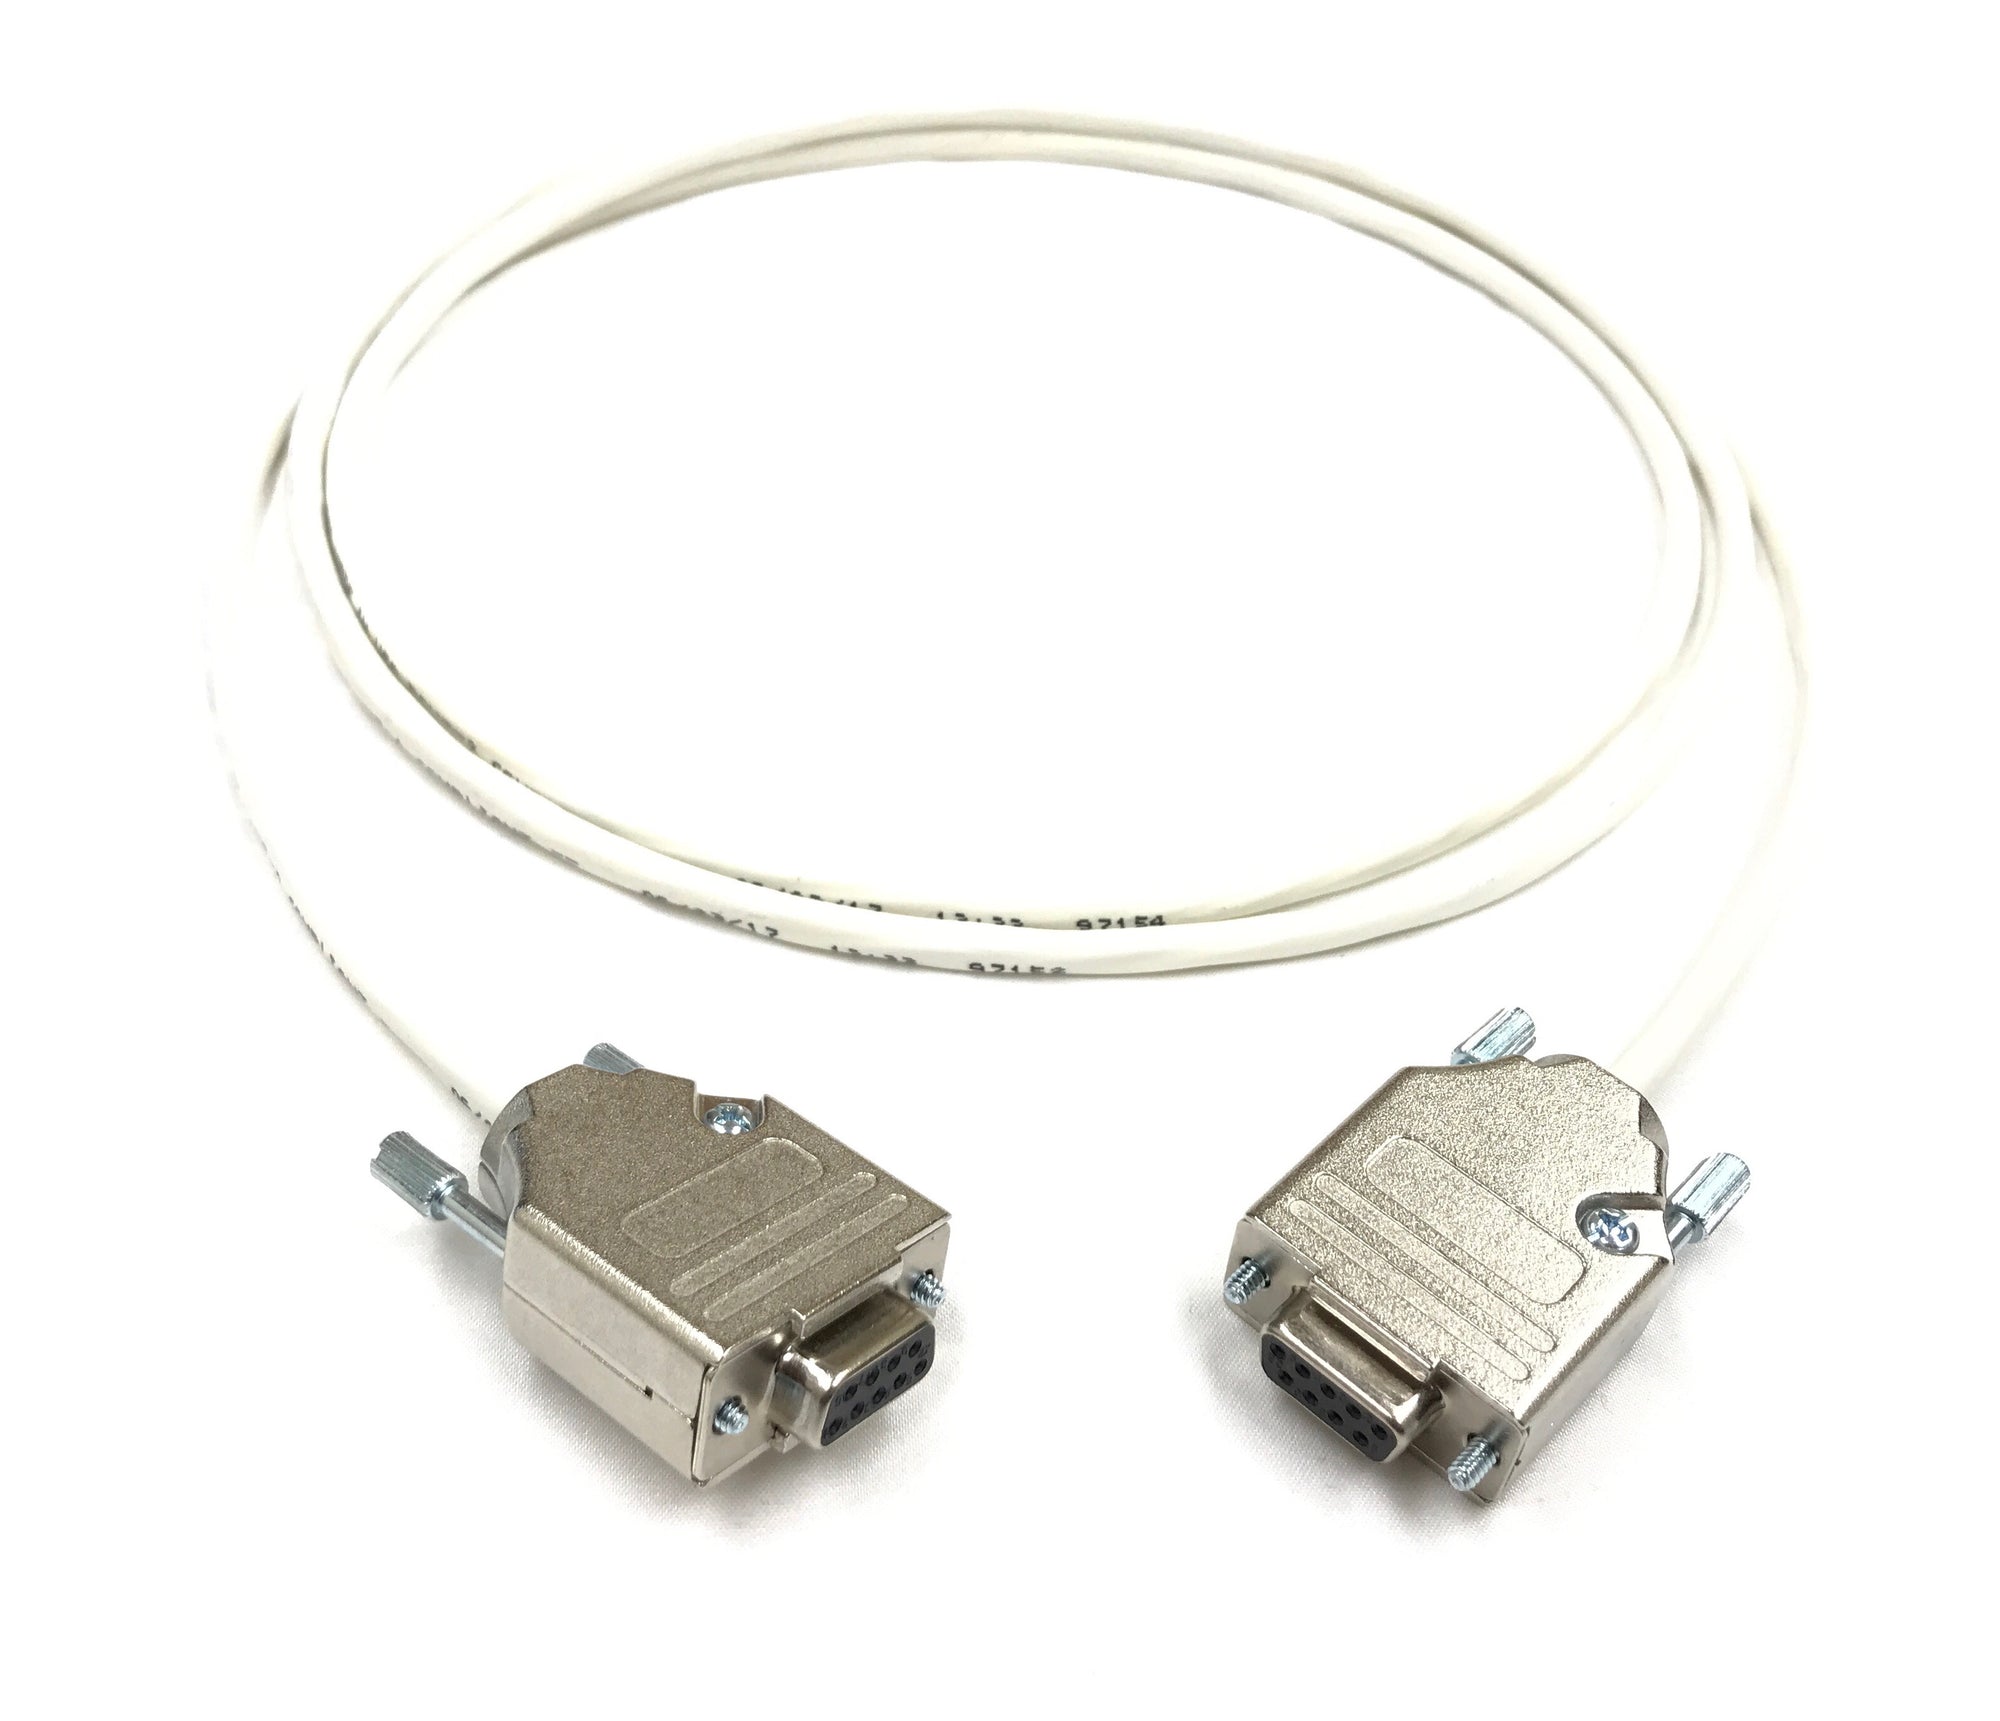 DB9 Female to Female 22 AWG Plenum White Jacket Serial Cable - Only Pins 1, 4 and 5 Wired